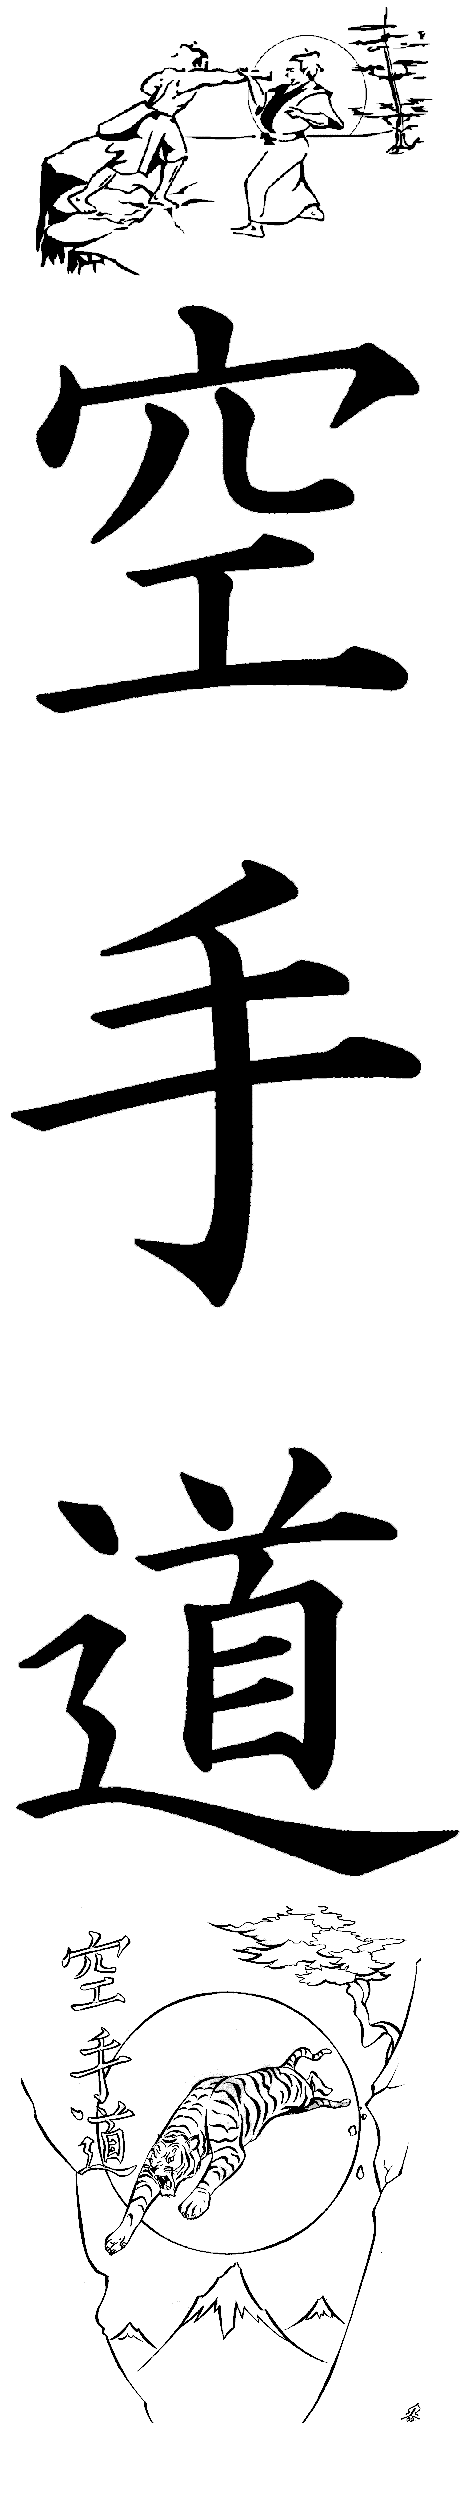 The karate sign